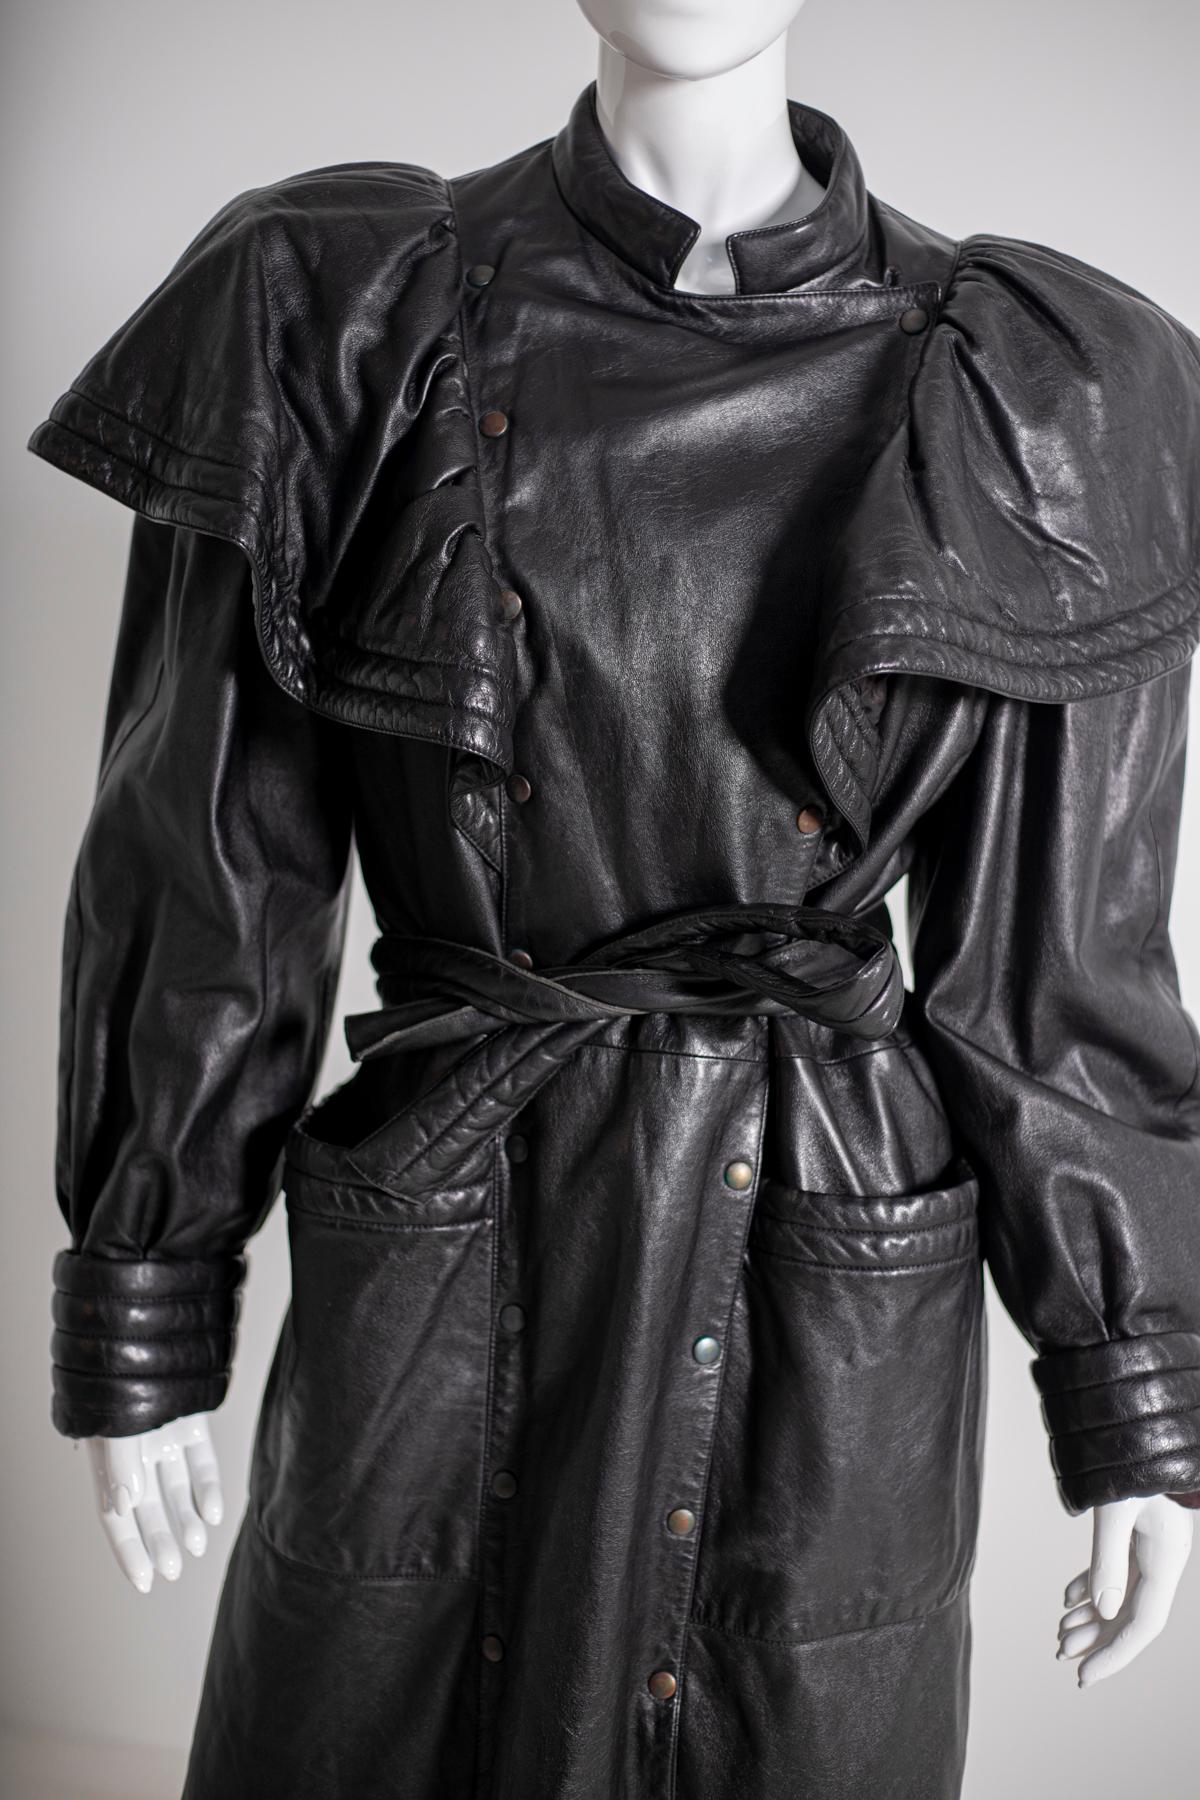 Women's or Men's Roccobarocco coat in black leather for woman 1980's.